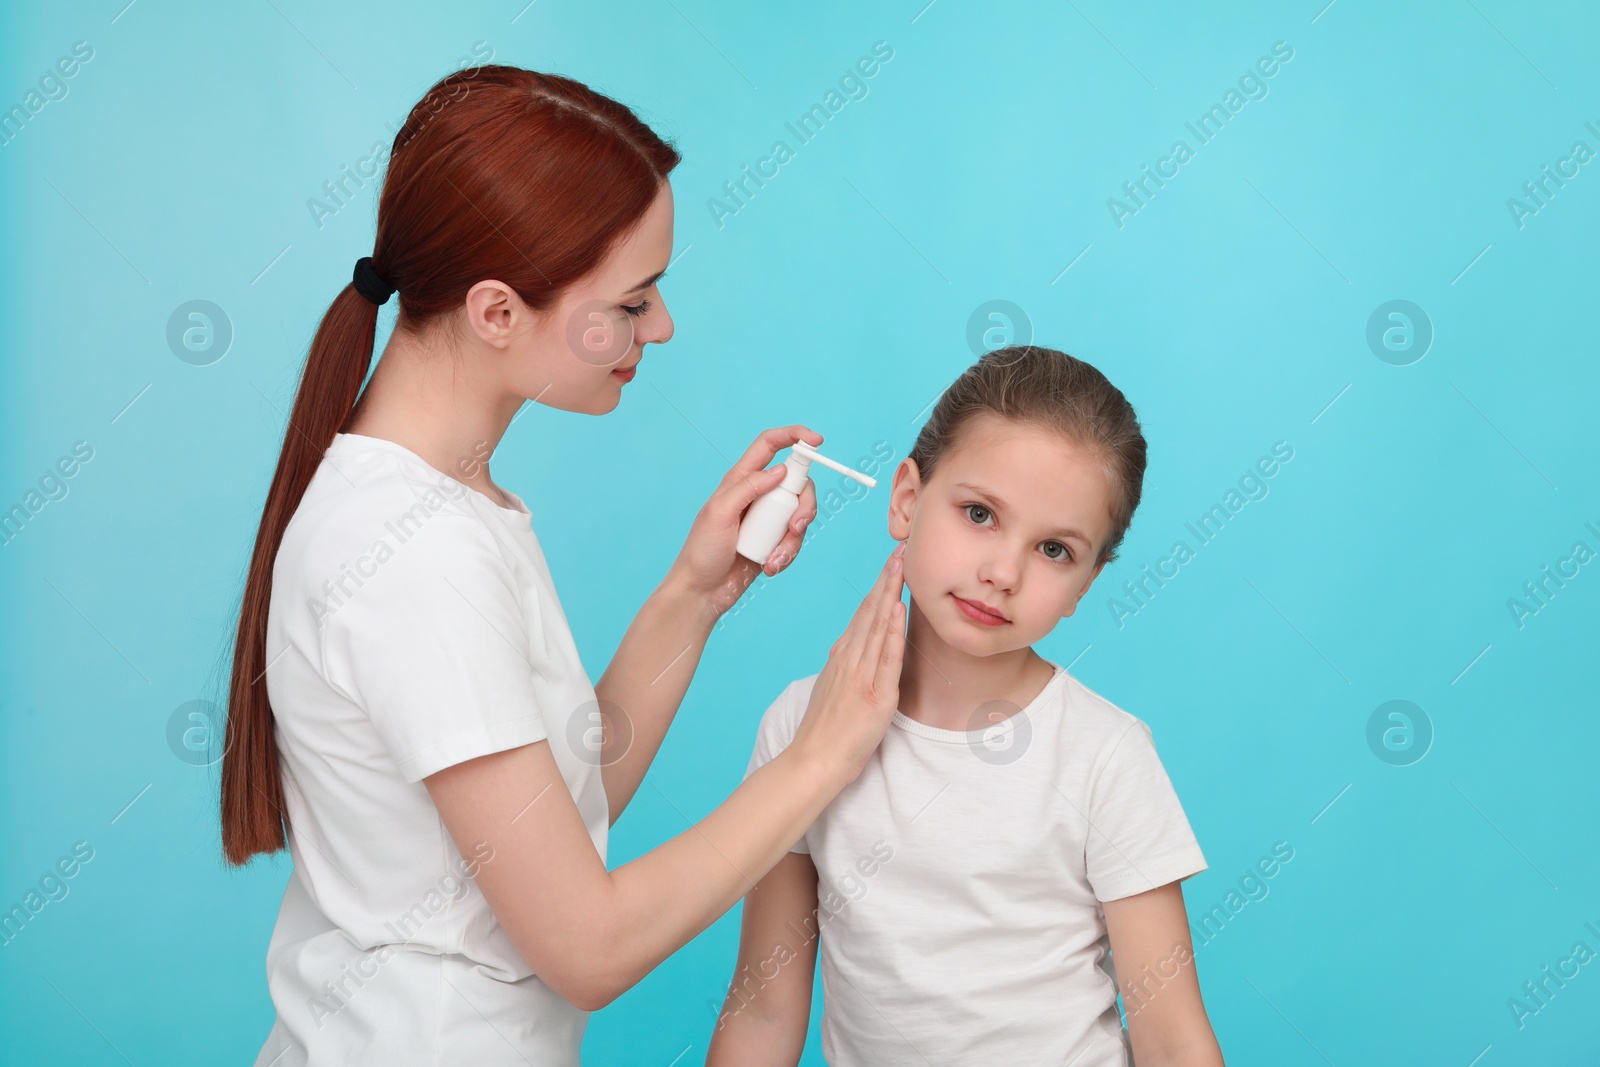 Photo of Mother spraying medication into daughter's ear on light blue background